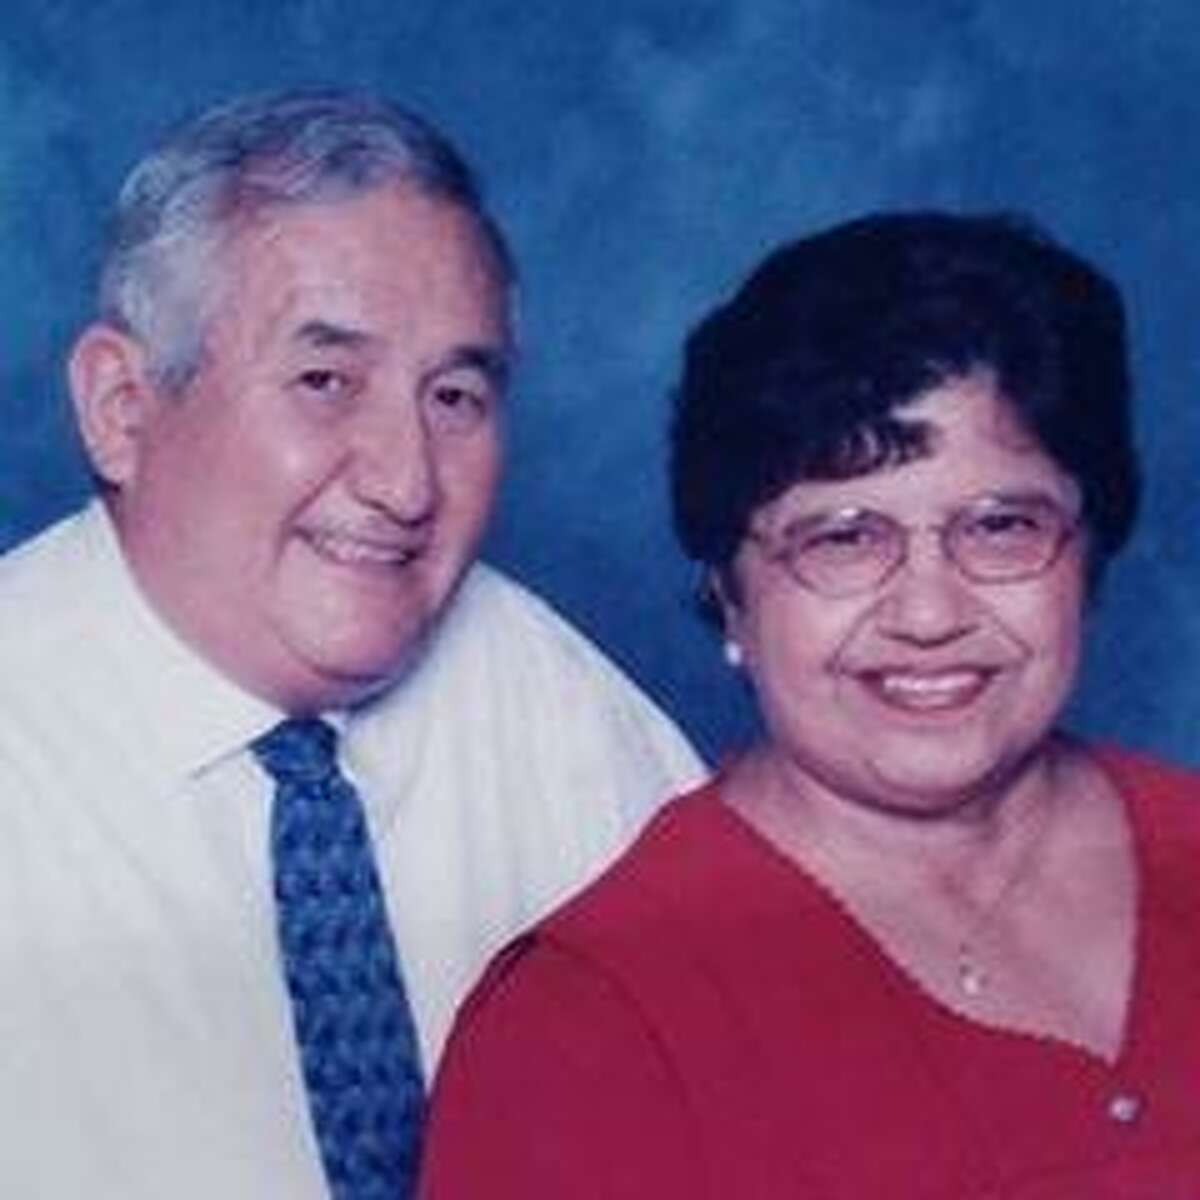 After getting married, Roberto and Rosie Anguiano settled on the South Side, where she grew up.